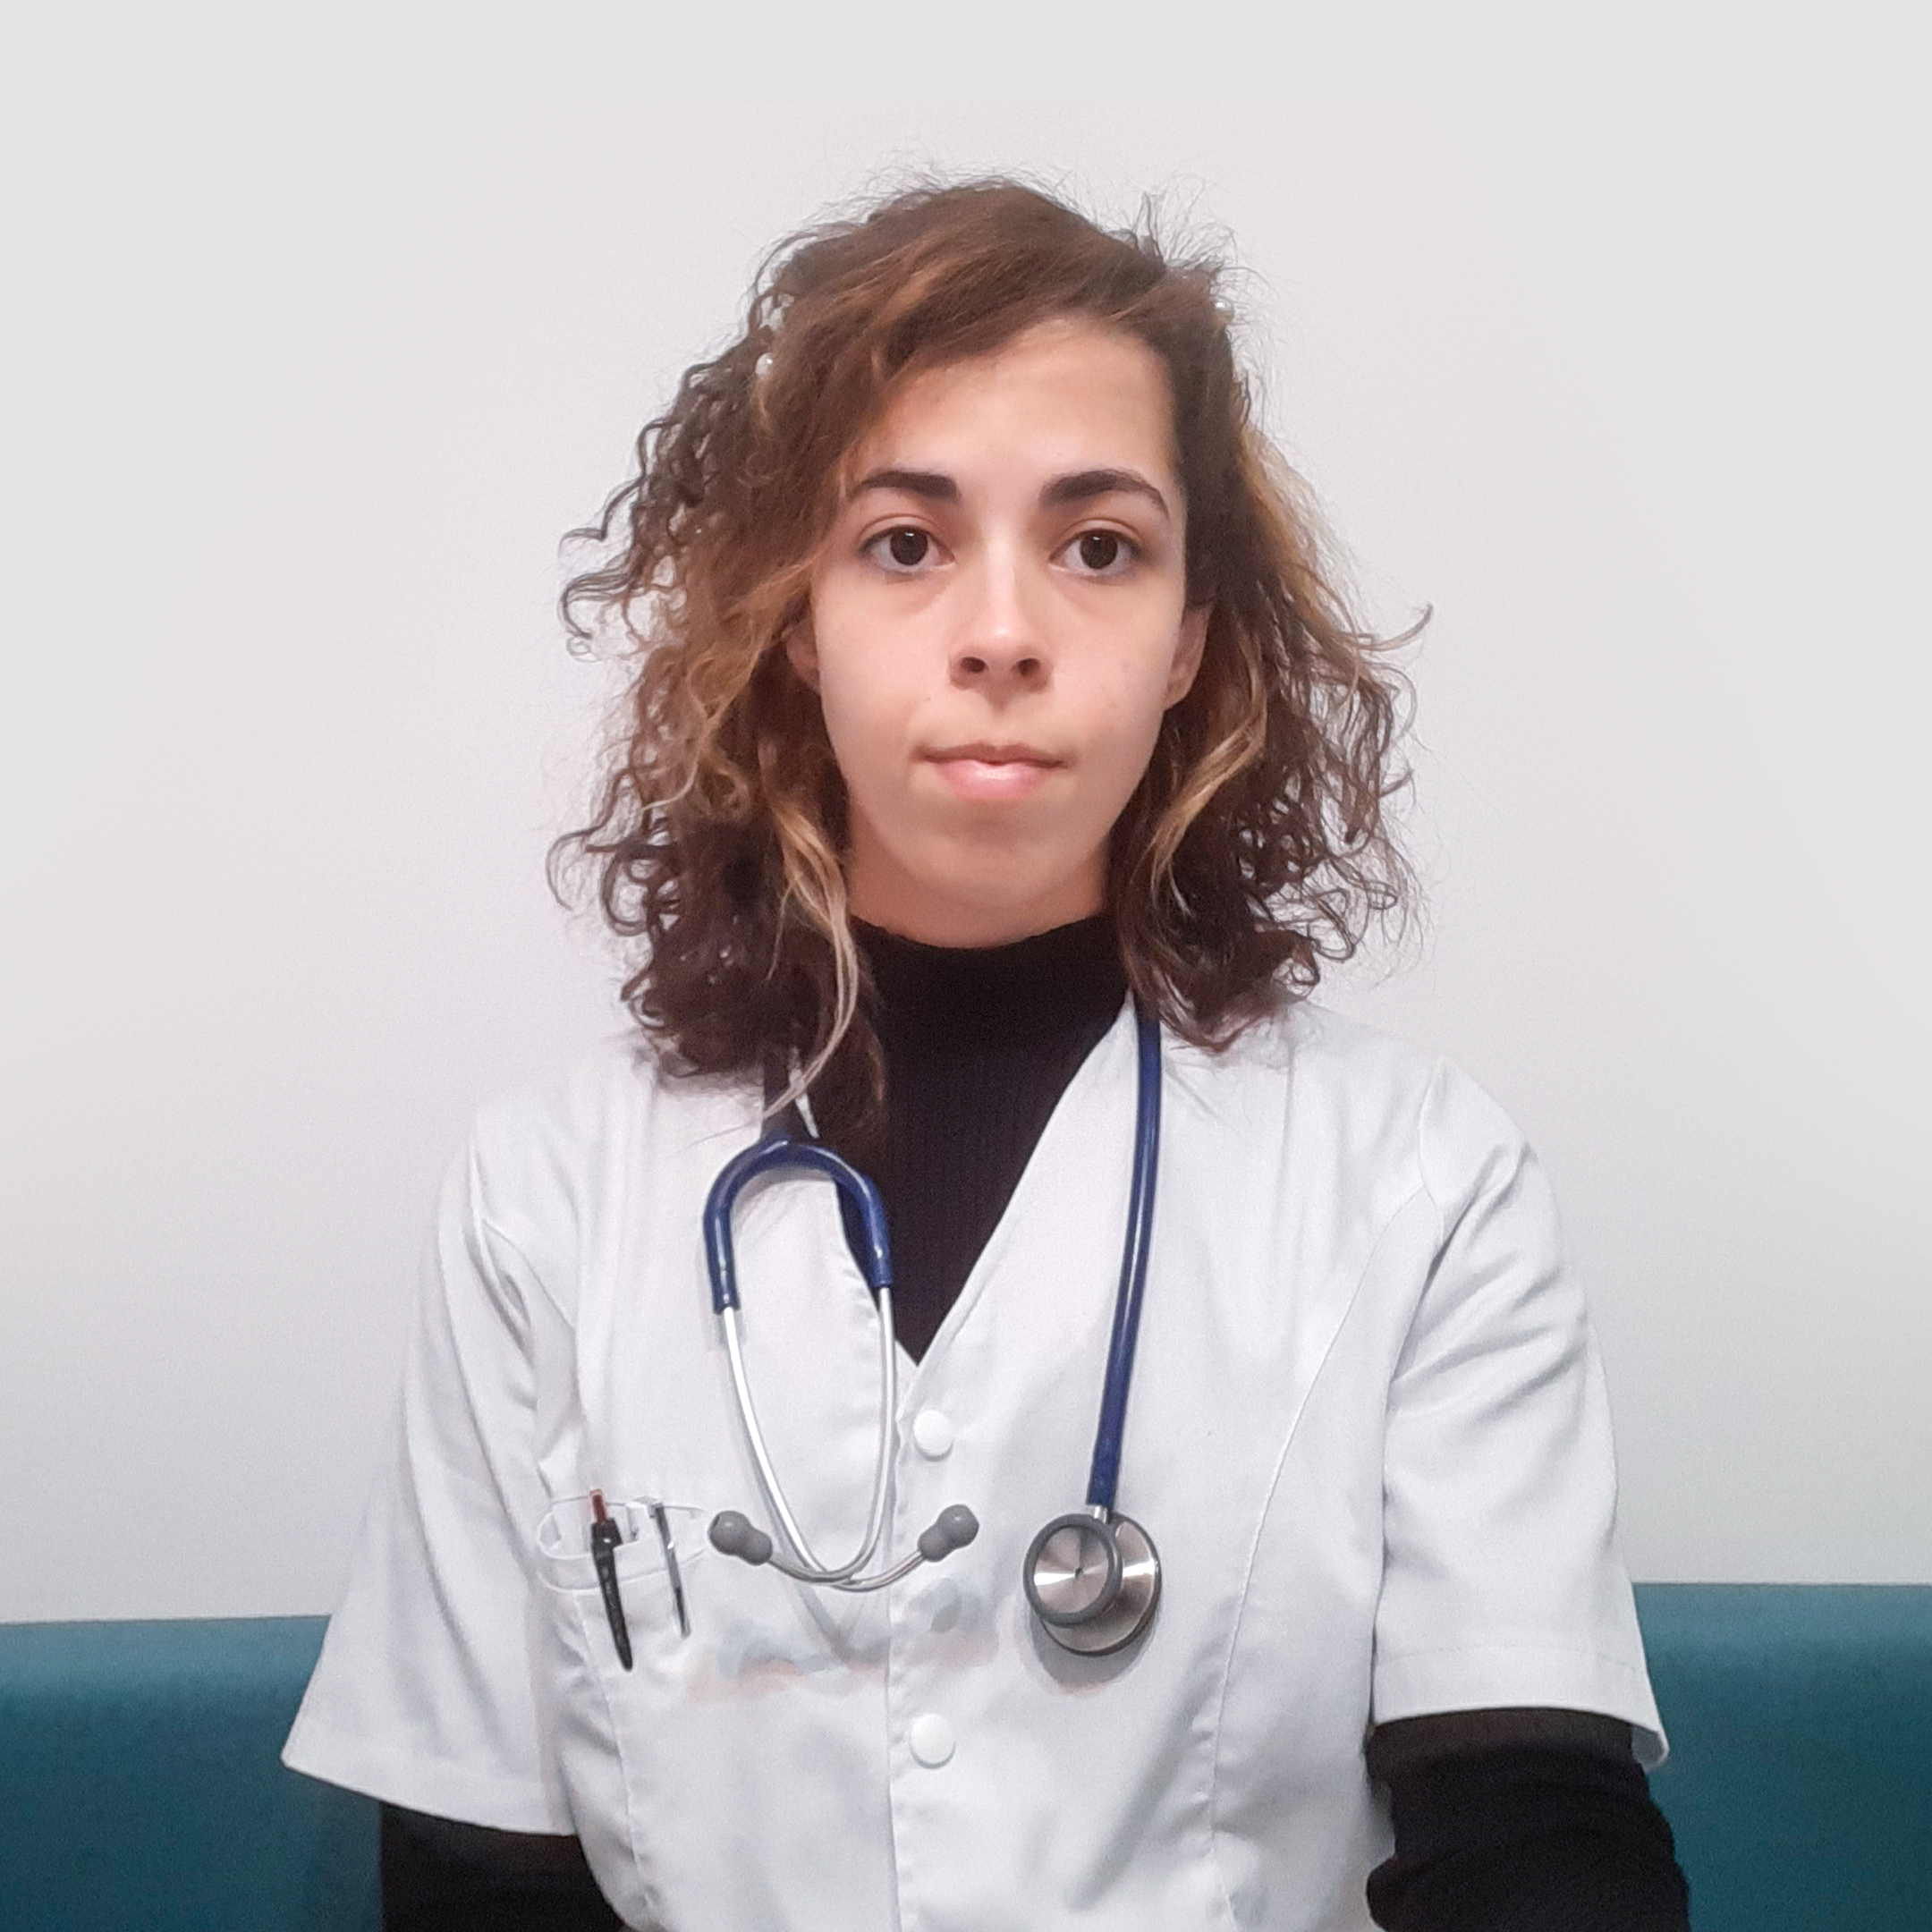 Maria’s Journey to a Career in Medicine